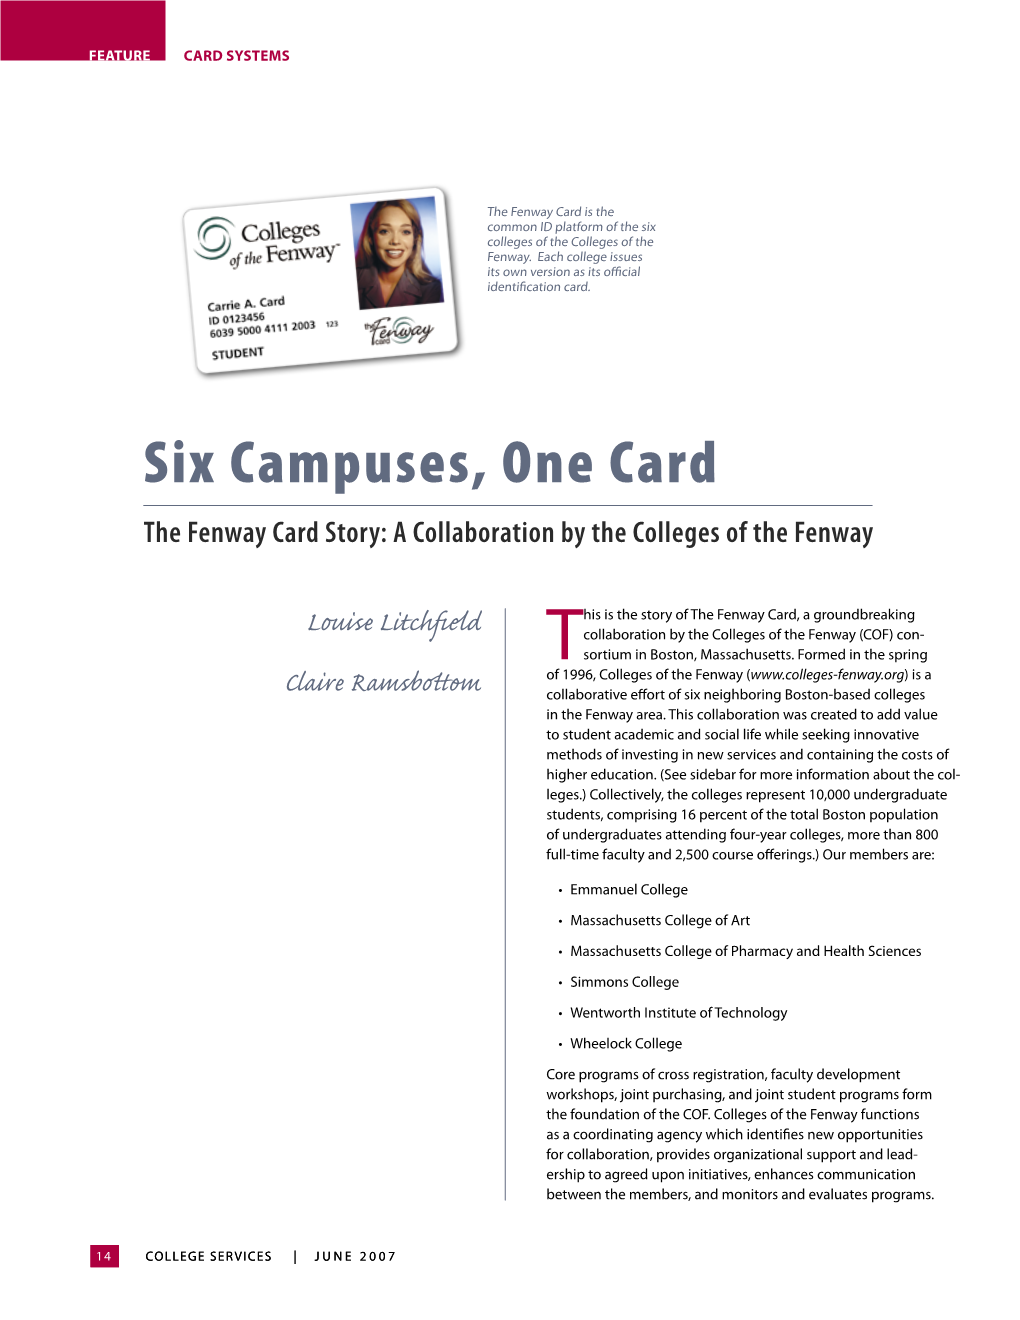 Six Campuses, One Card the Fenway Card Story: a Collaboration by the Colleges of the Fenway